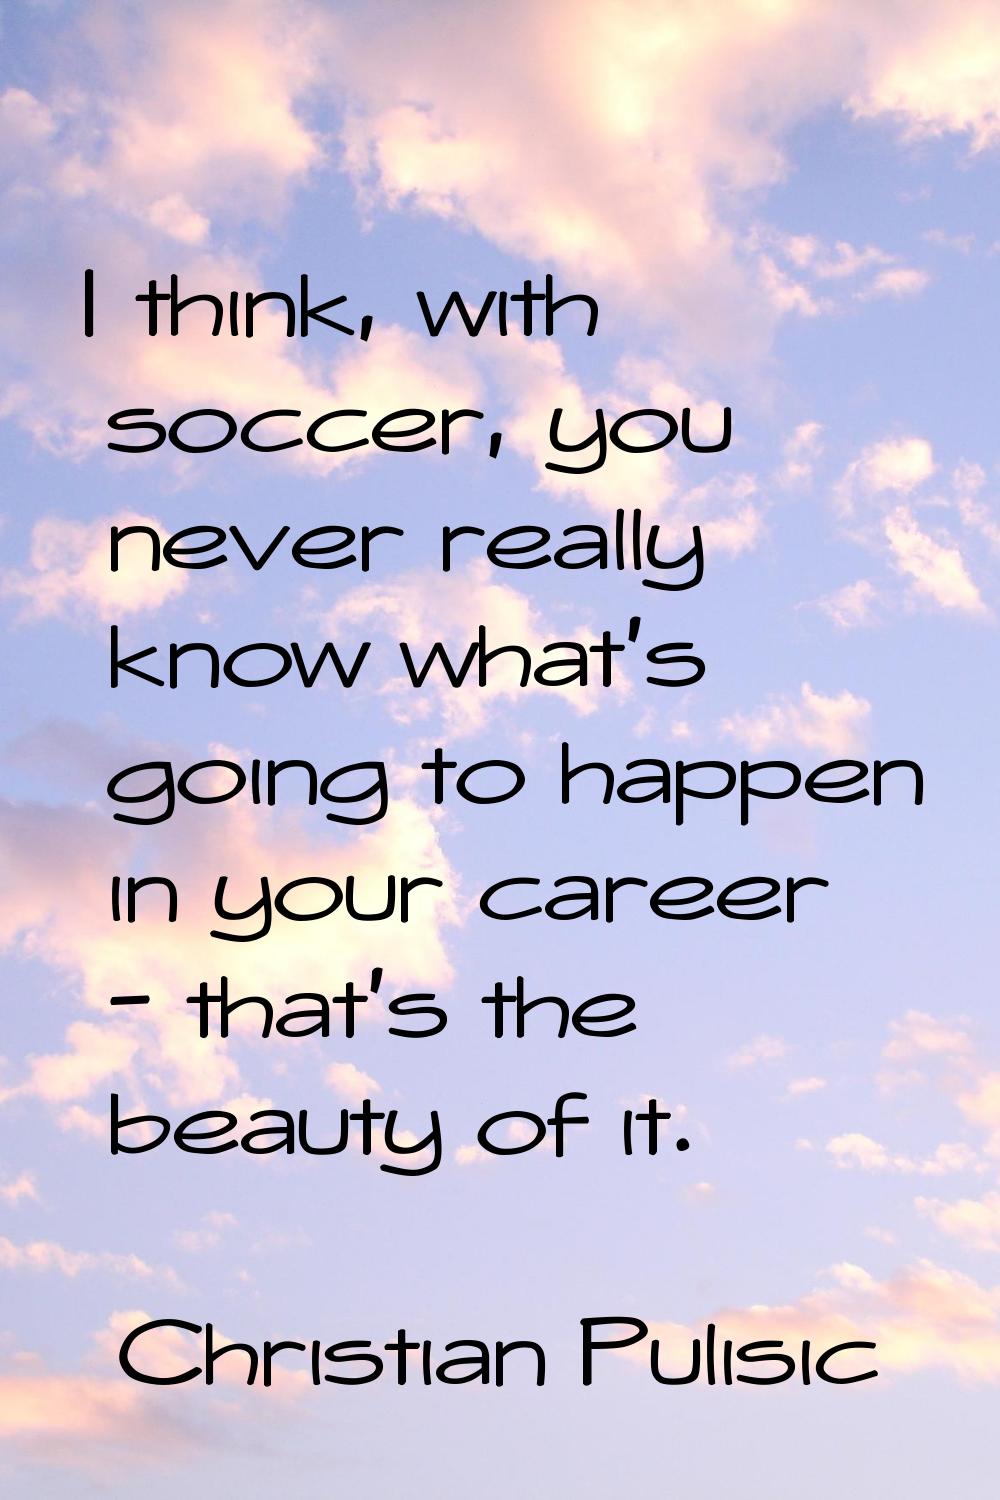 I think, with soccer, you never really know what's going to happen in your career - that's the beau